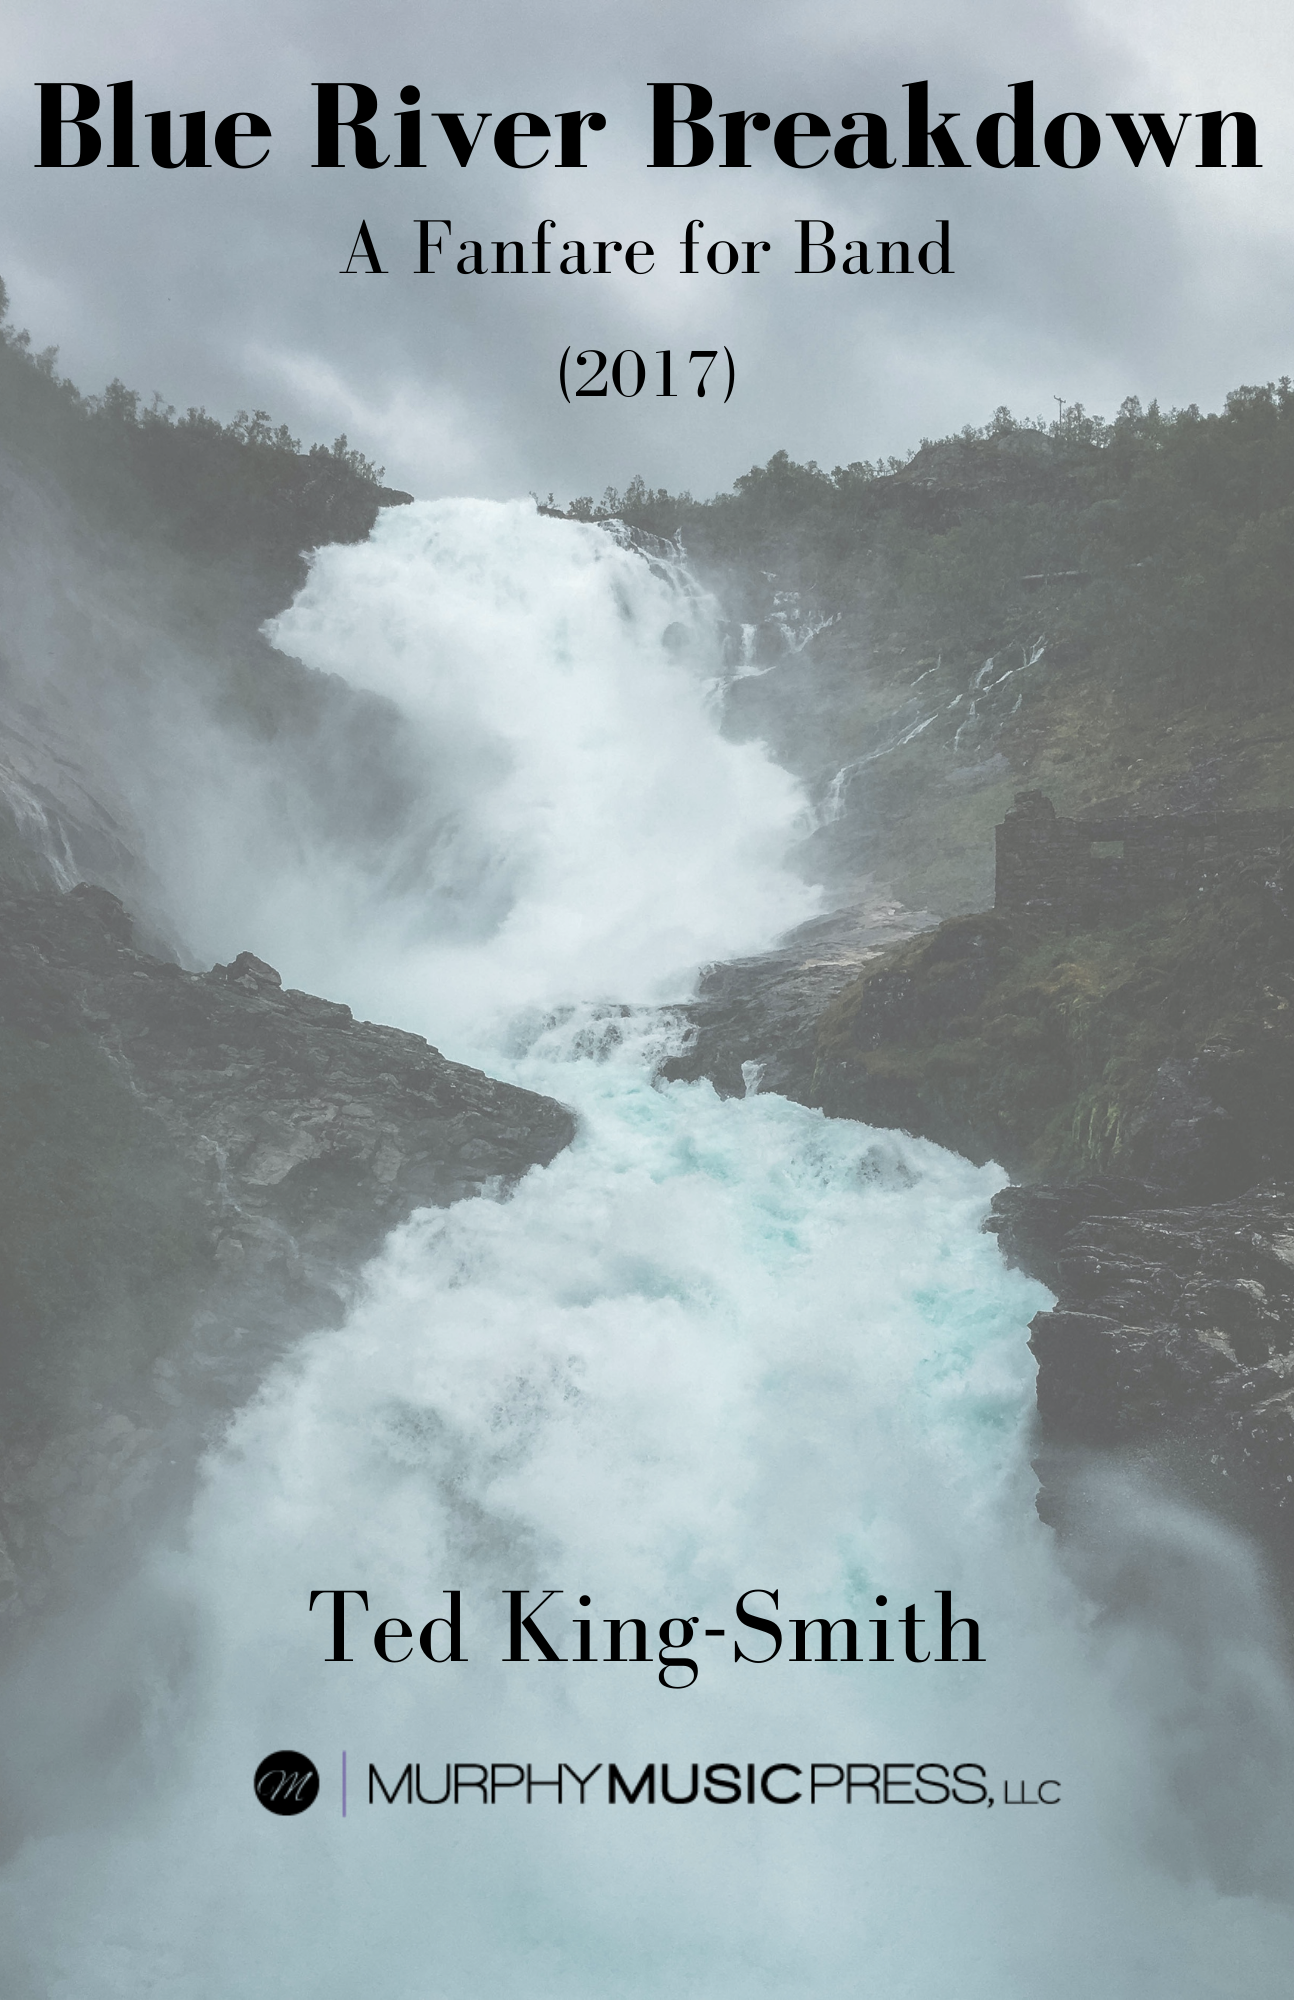 Blue River Breakdown by Ted King-Smith